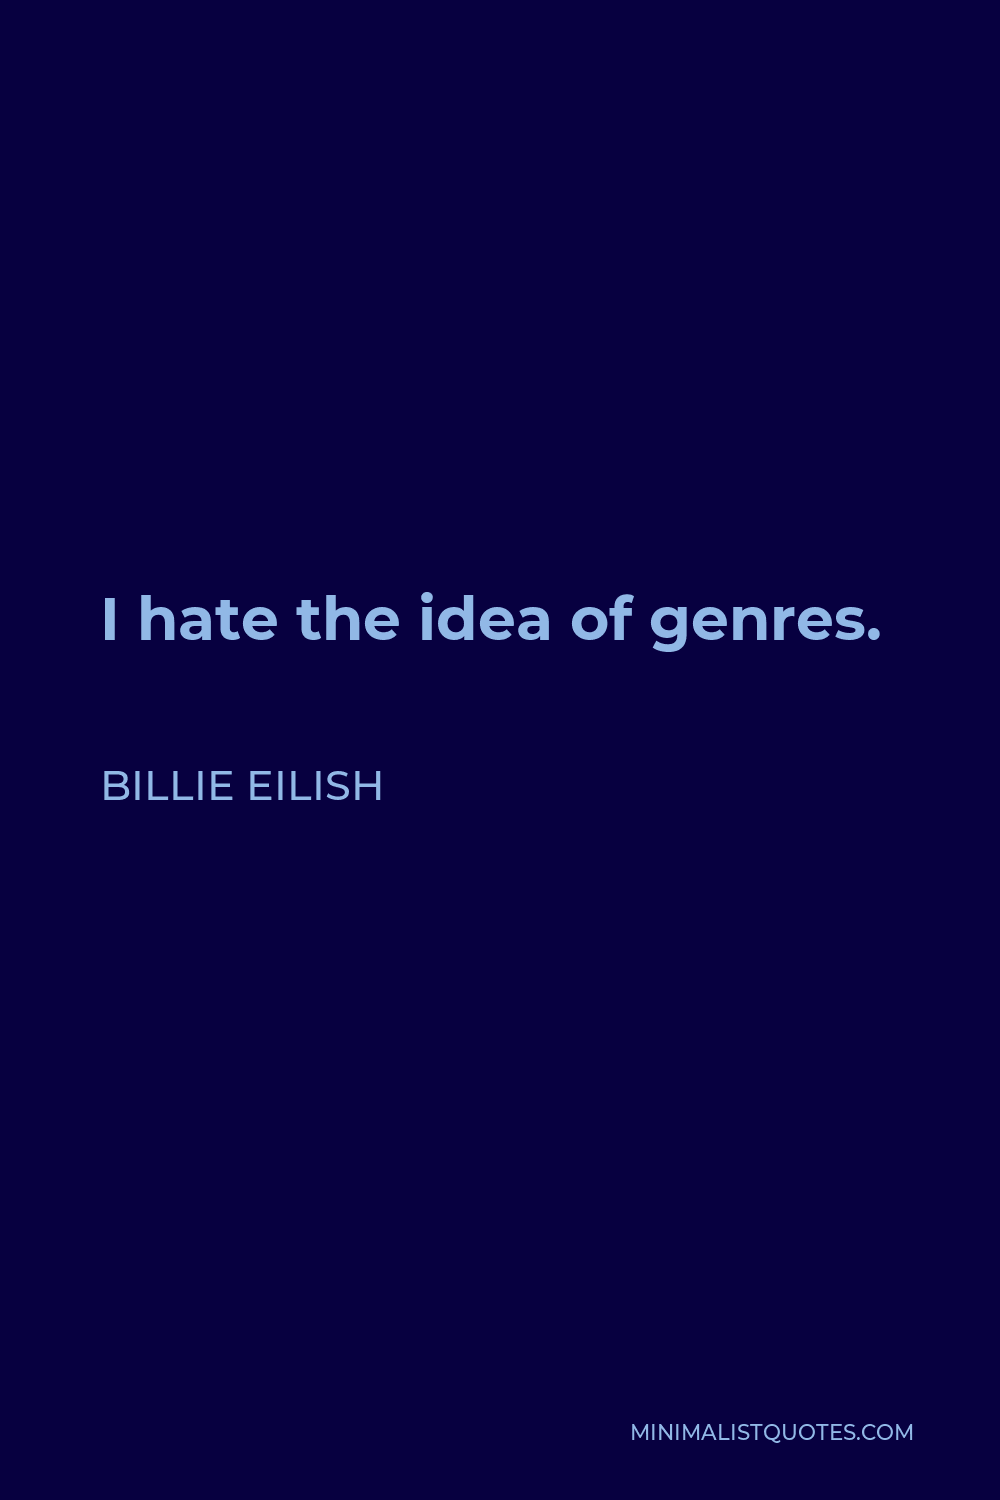 Billie Eilish Quote - I hate the idea of genres.